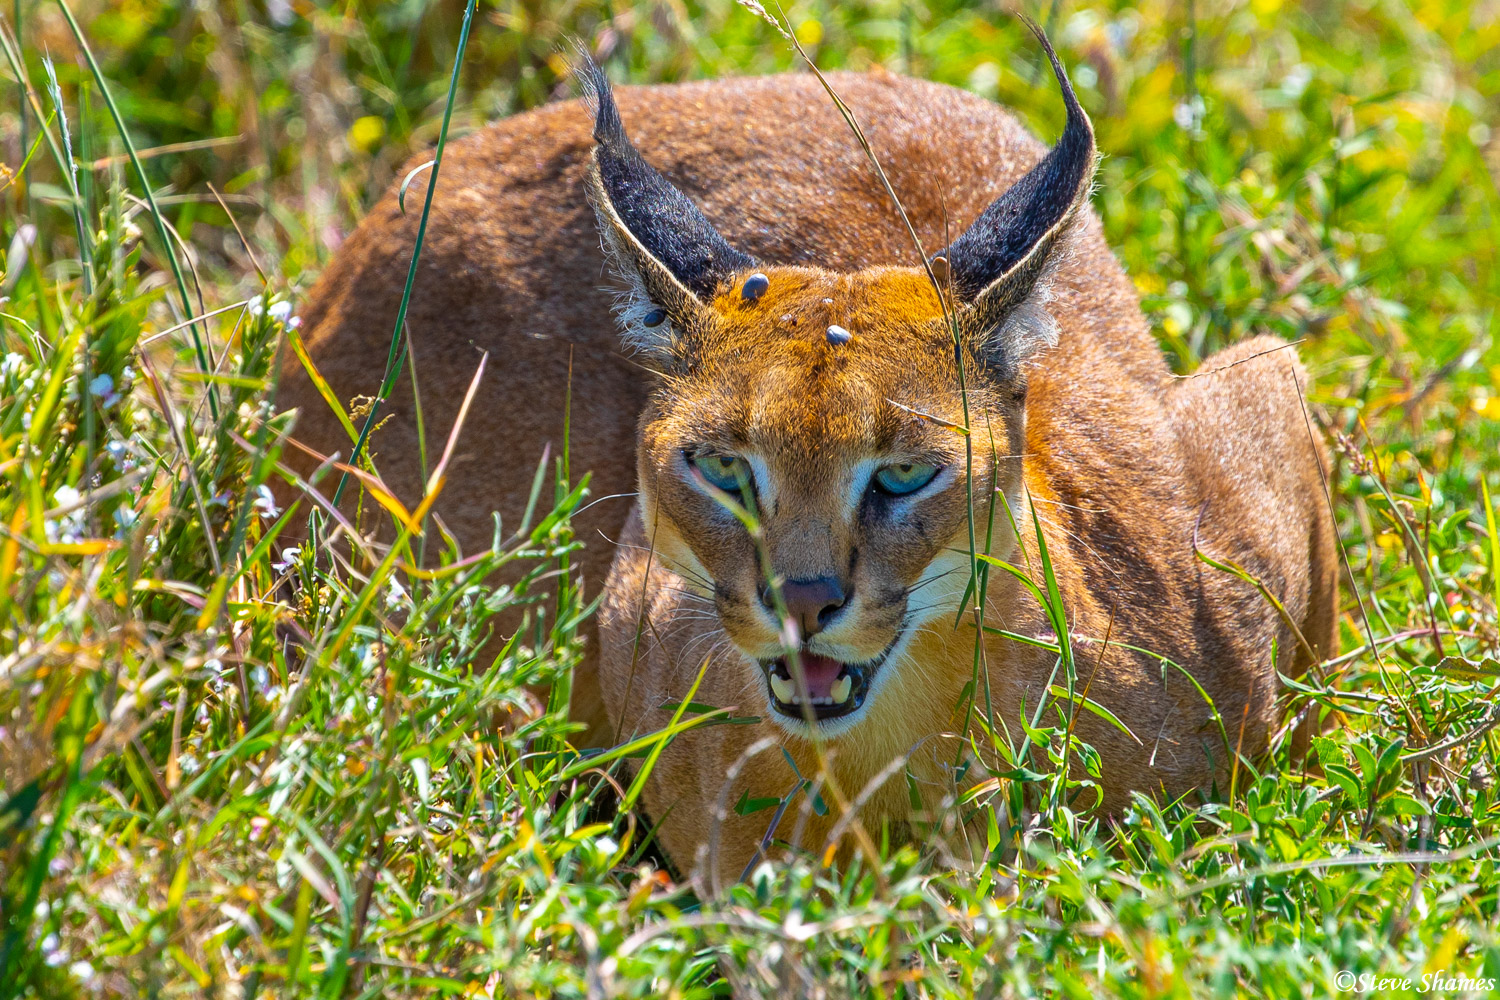 Here is a caracal cat, which is not a common sight to see.